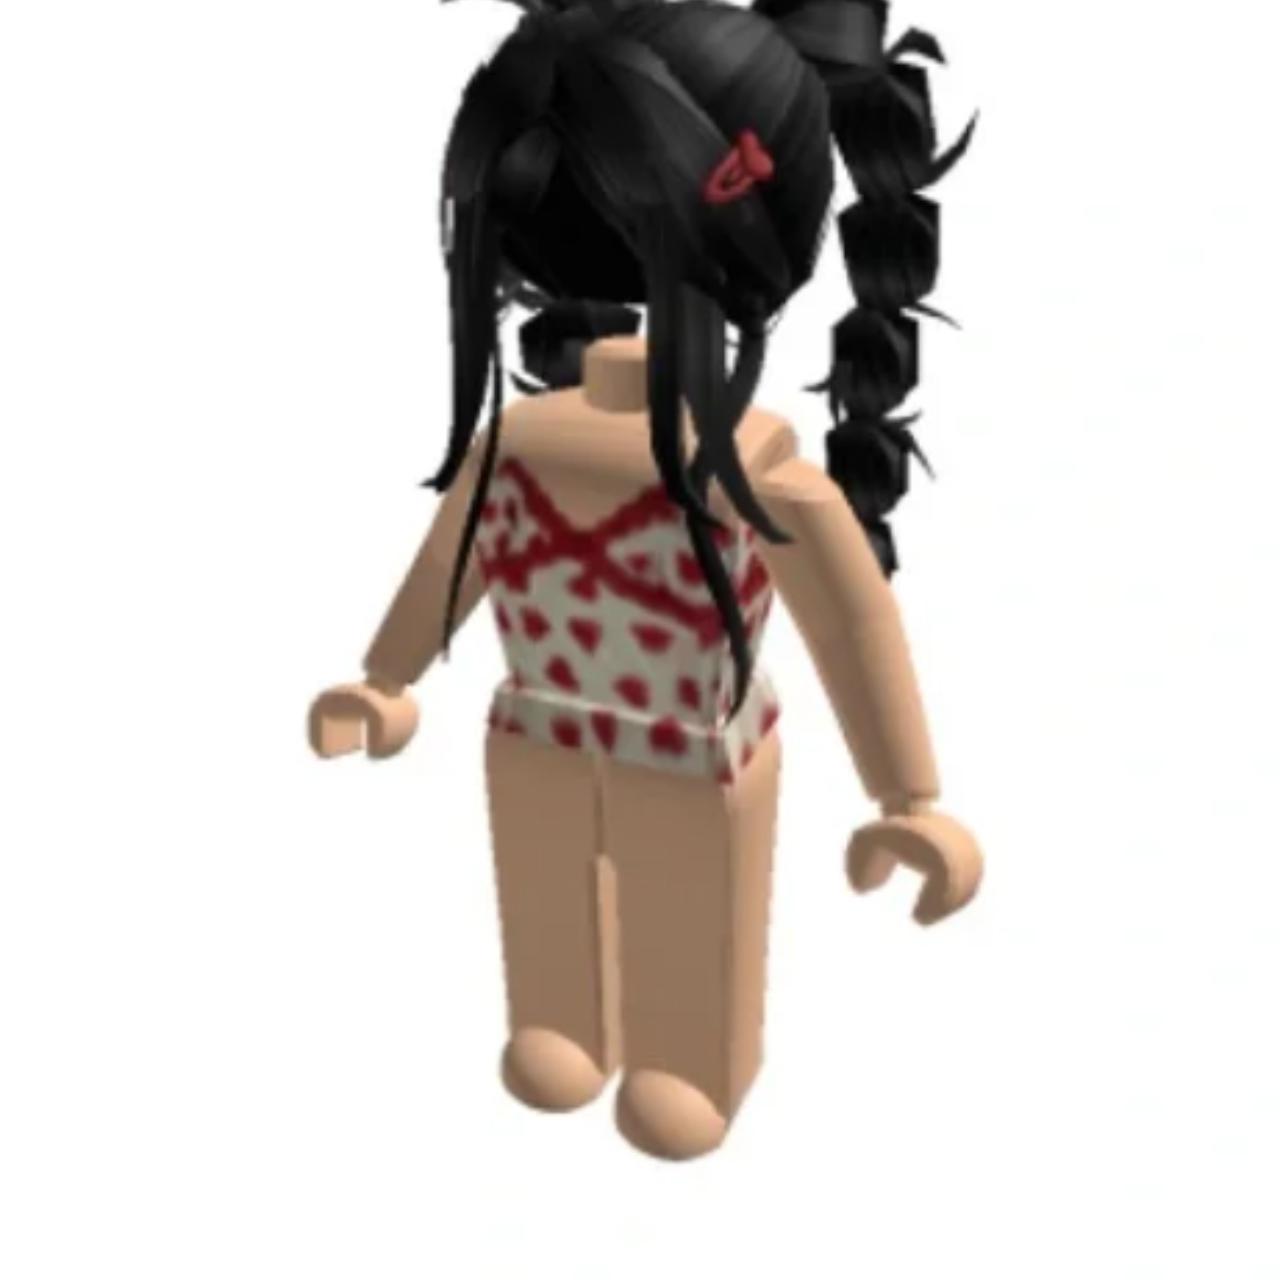 How Much is Headless on Roblox